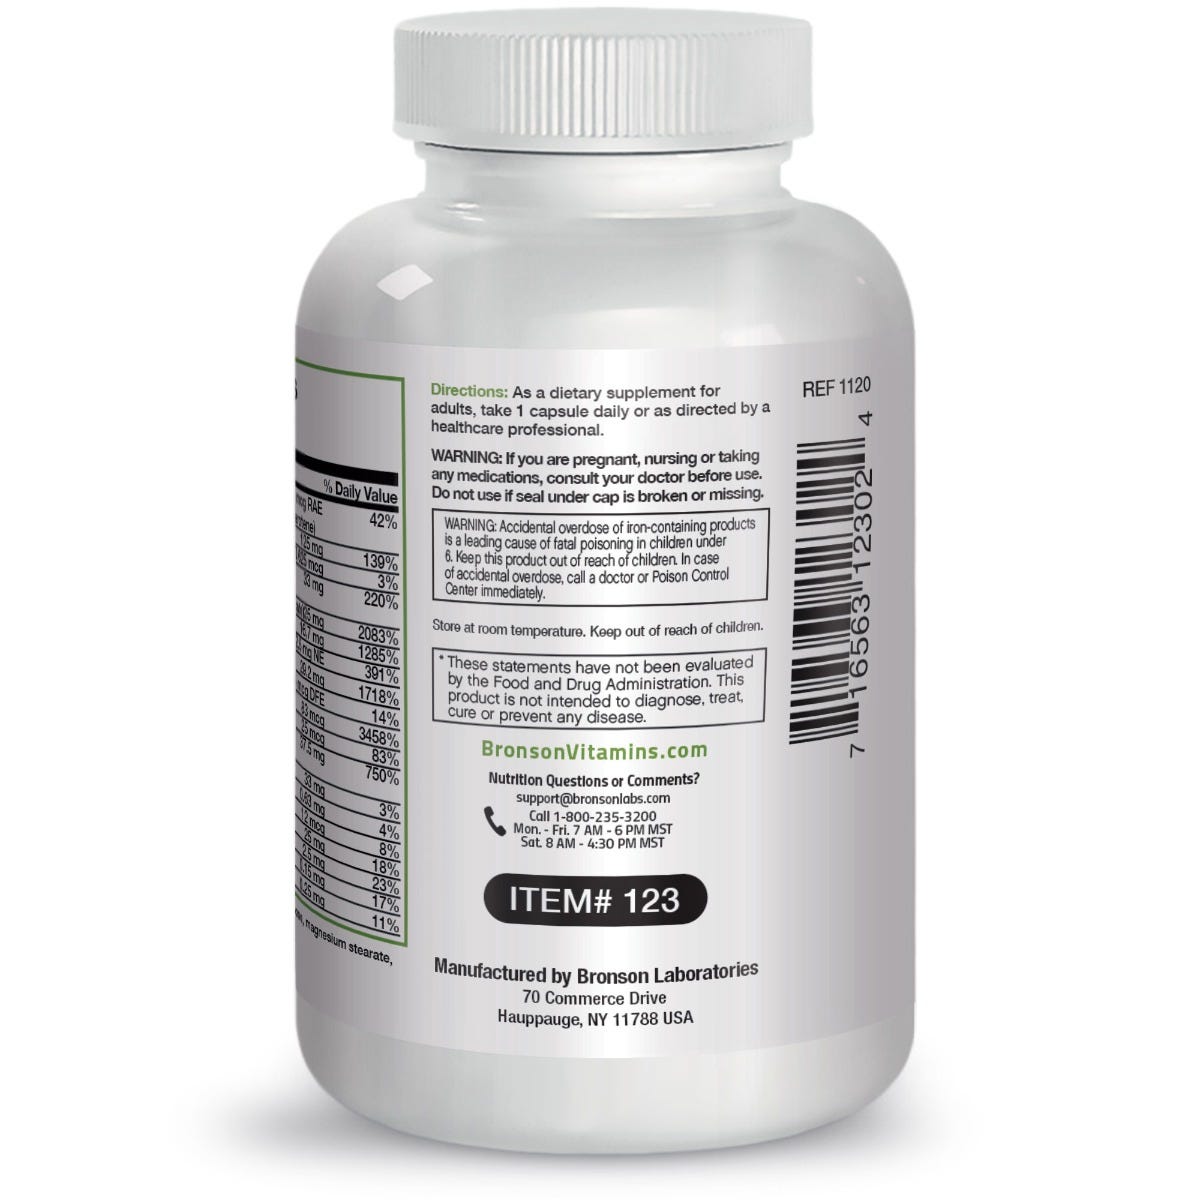 One Daily Multivitamin and Mineral (Formerly GTC Formula #2) - 180 Capsules view 3 of 4